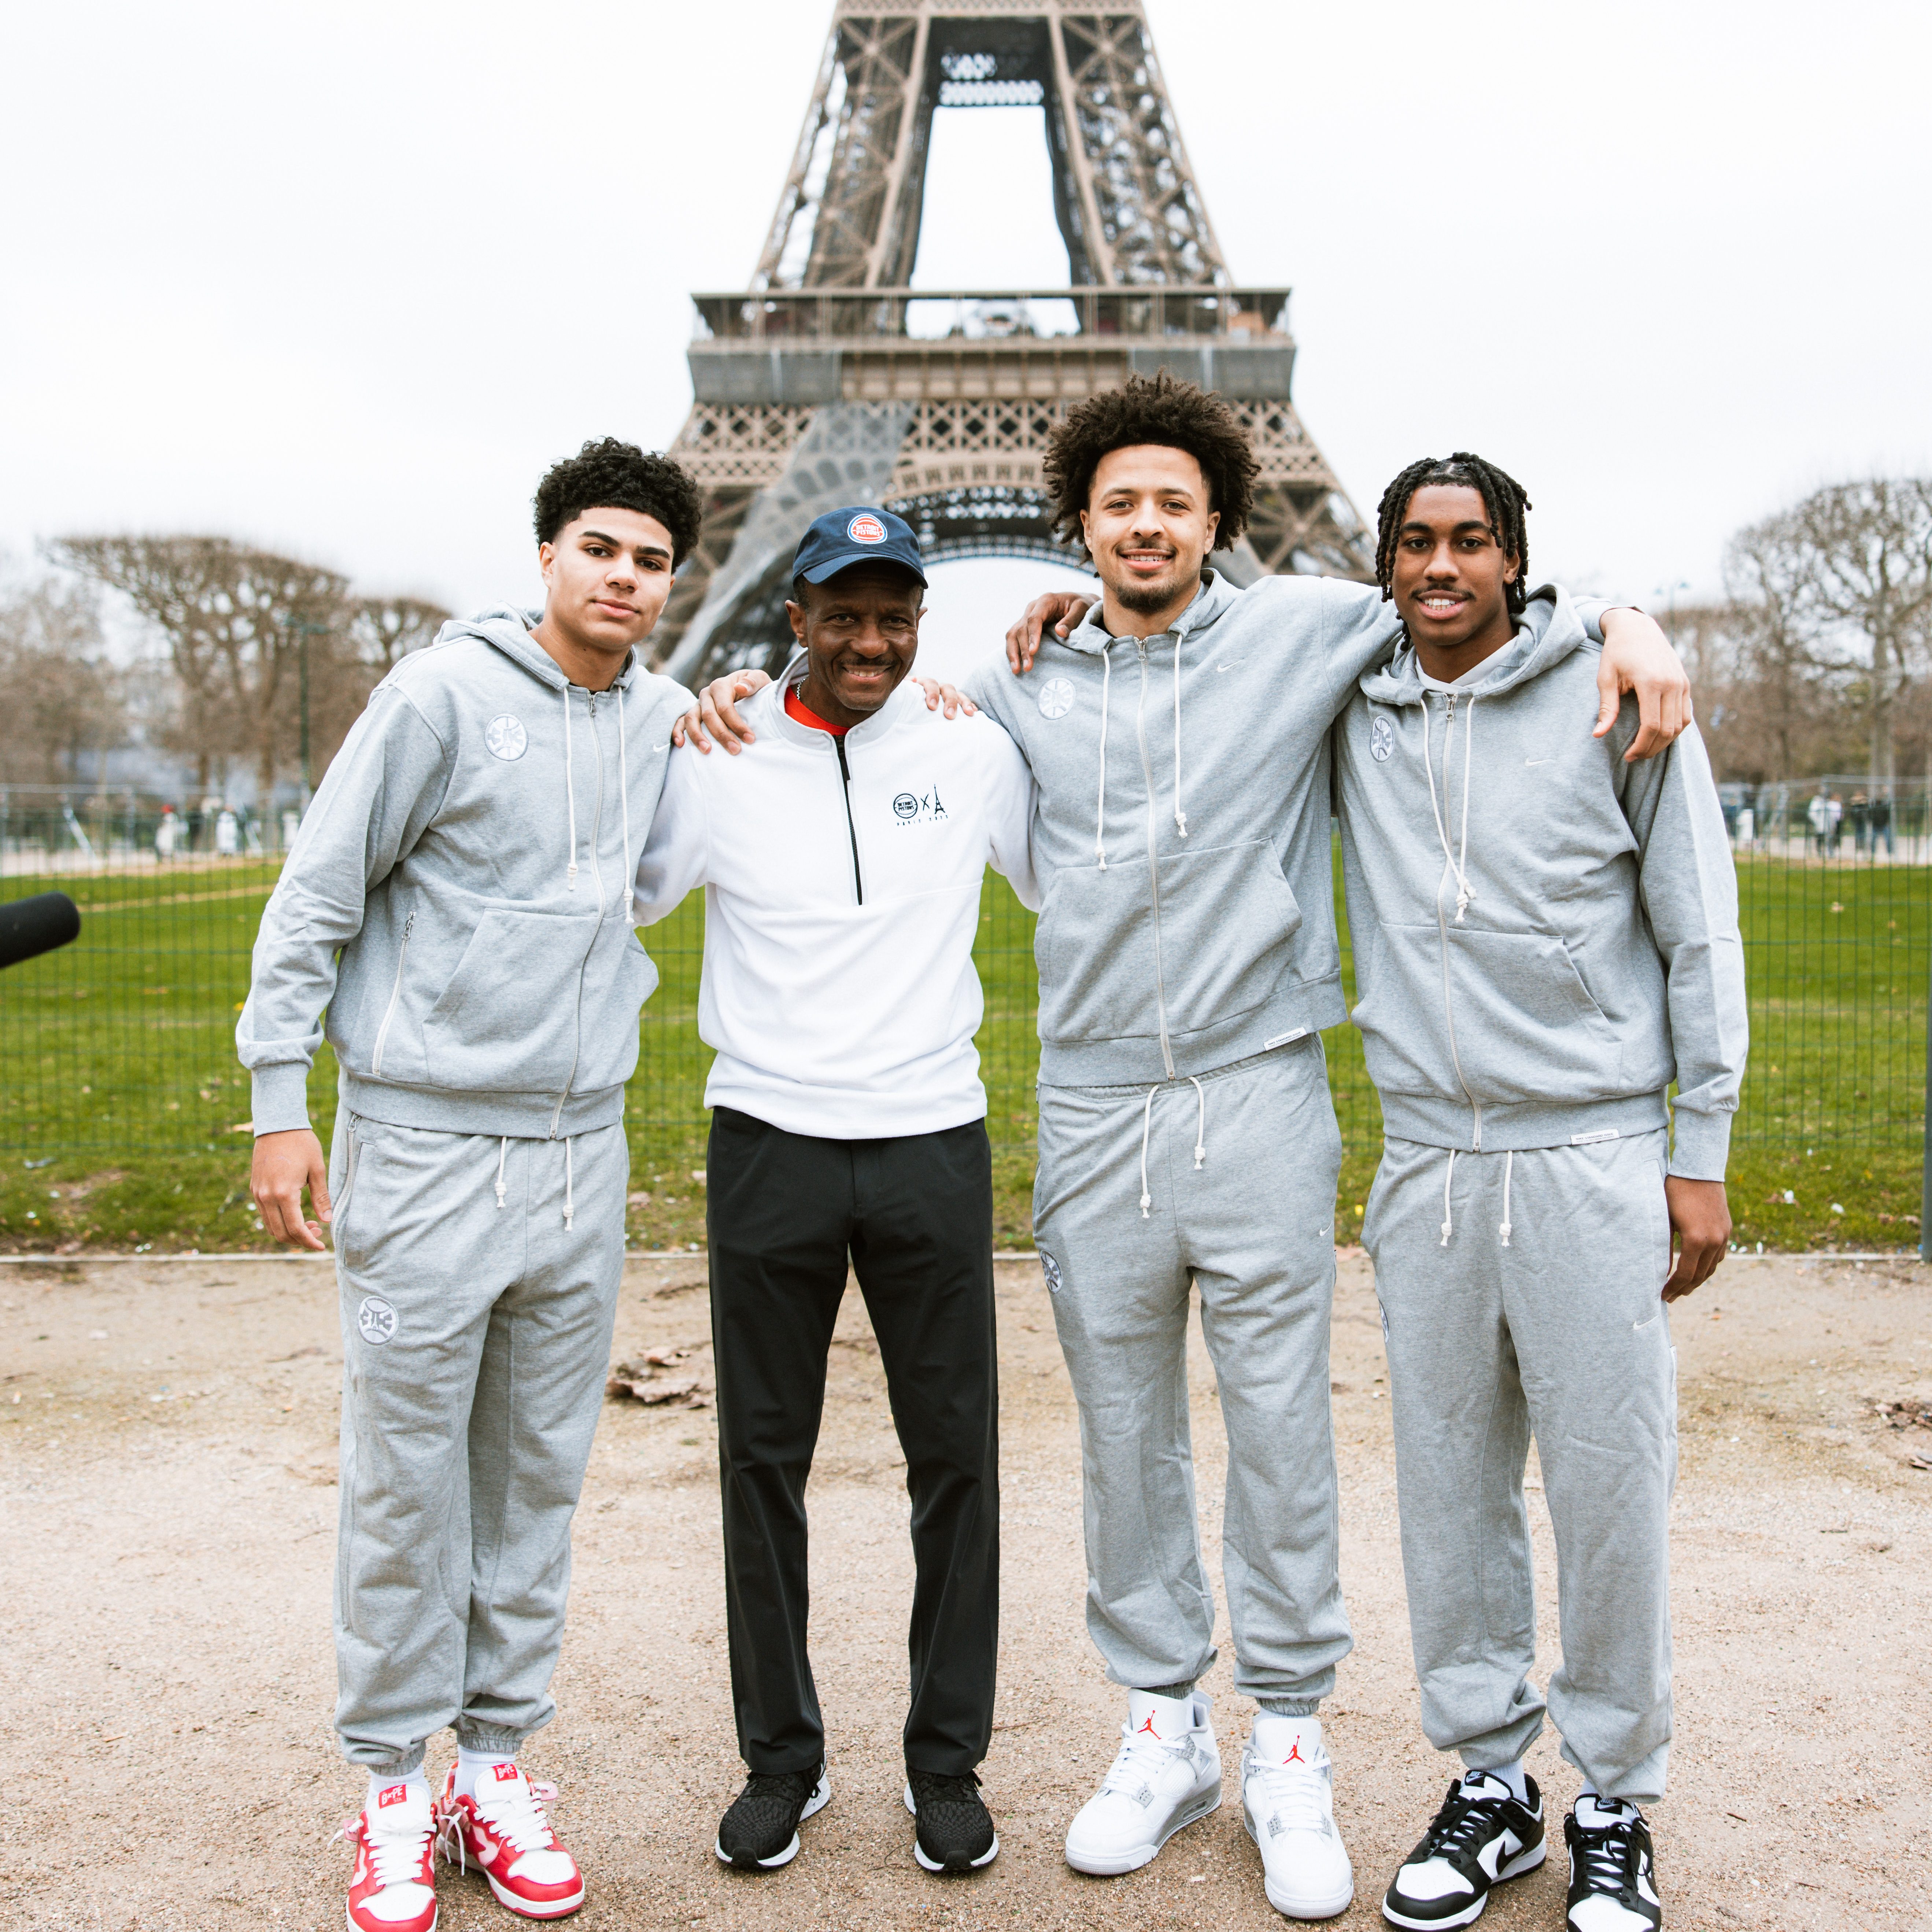 Detroit Pistons owner Tom Gores on team playing in Paris: ‘Experiences like these can really help strengthen bonds and bring people together’